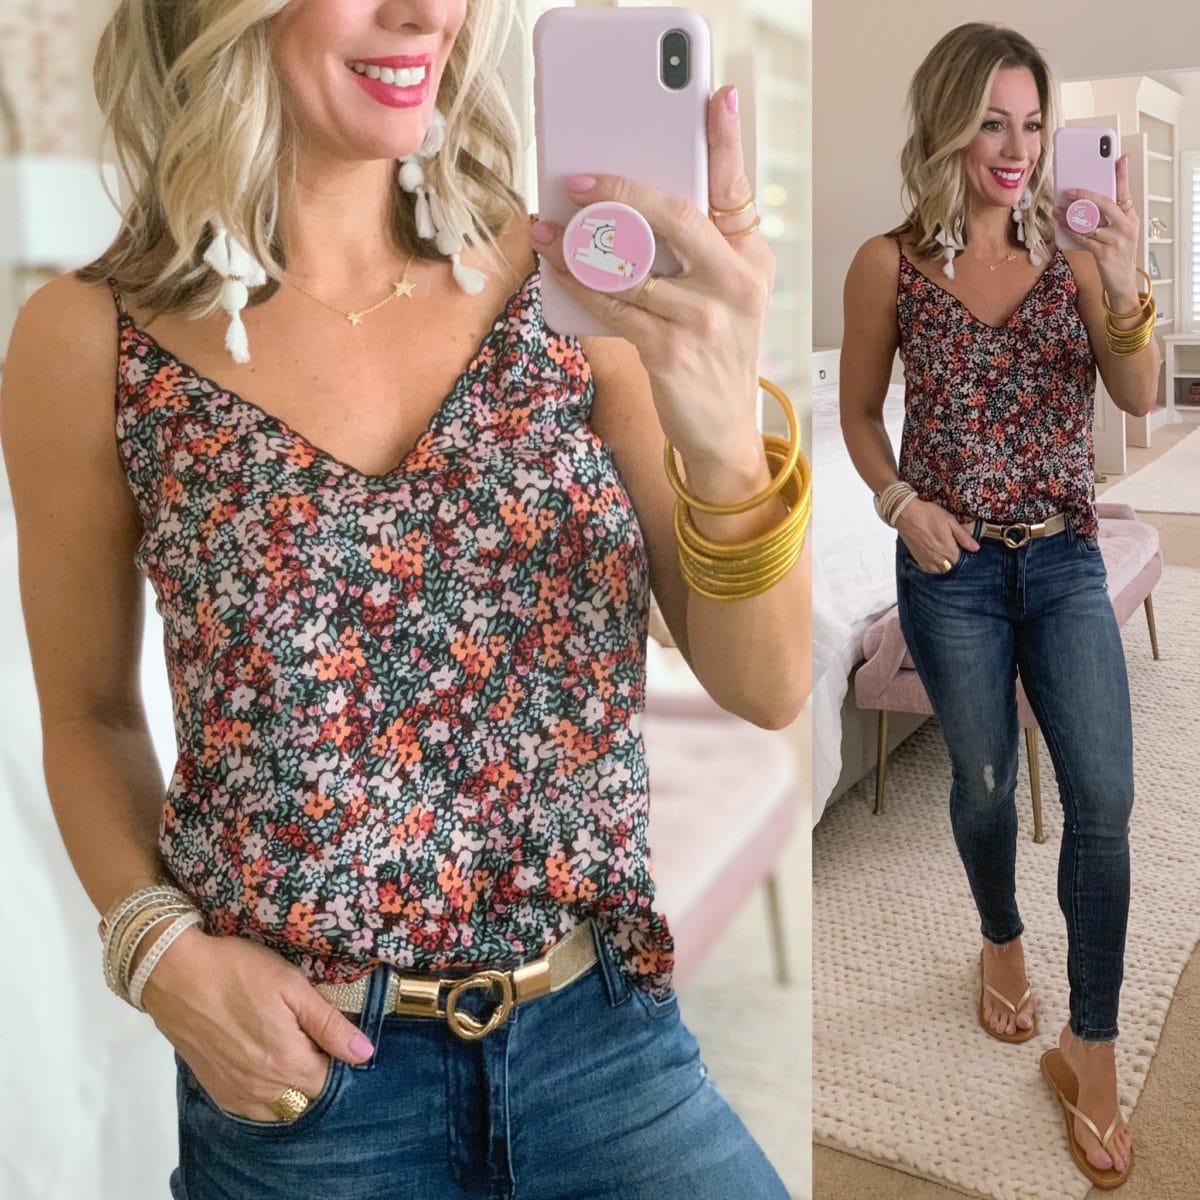 Floral Print Cami, Gold Bet, Kut from KLOTH jeans, Gold Flip Flops 